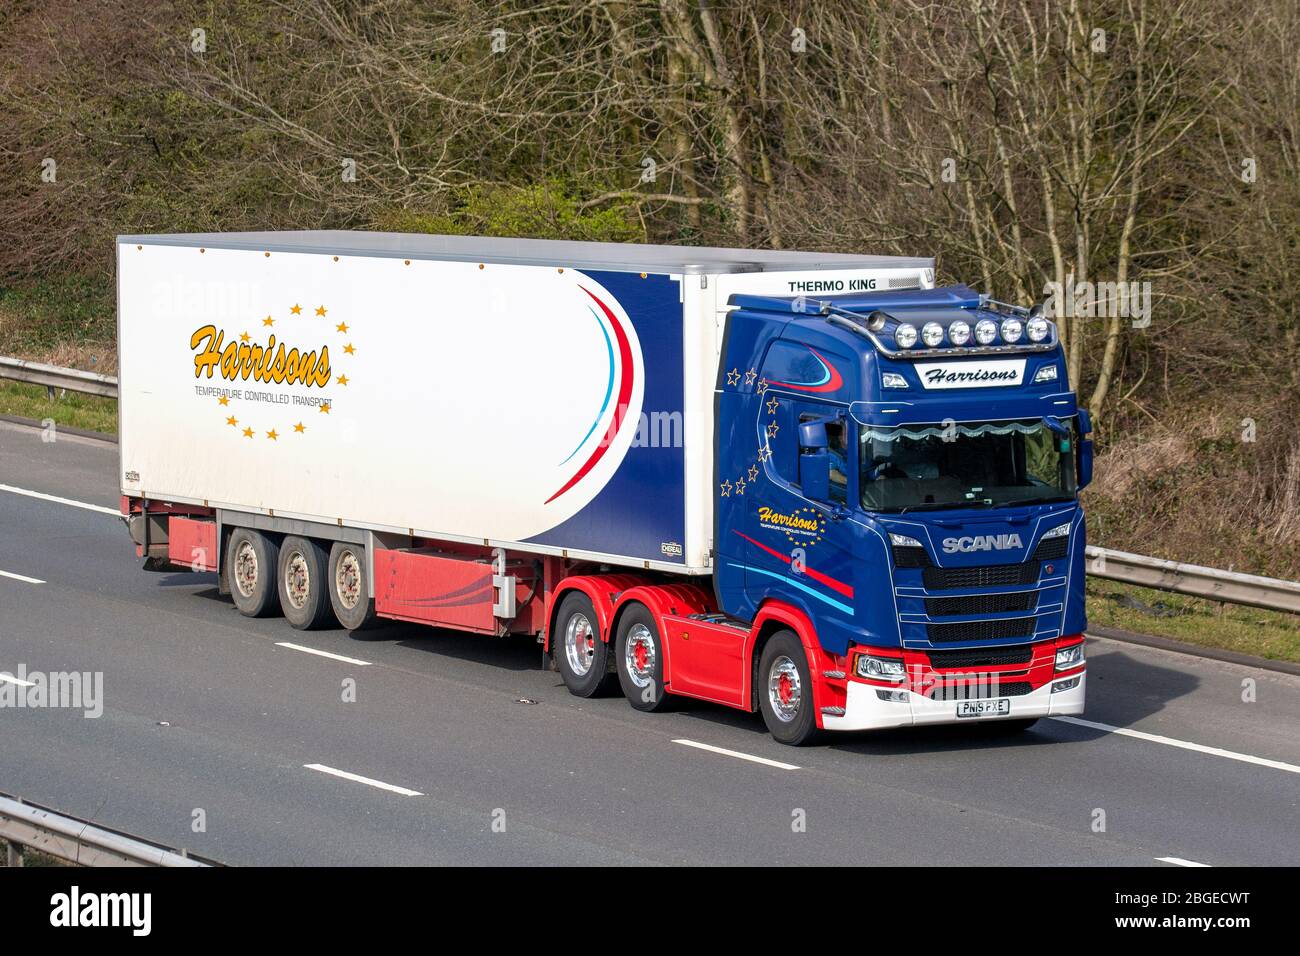 Harrisons Holdings Ltd Haulage delivery trucks, food lorry, Chilled transportation, truck, cargo carrier, Scania S450 vehicle, European commercial transport, industry, M61 at Manchester, UK Stock Photo